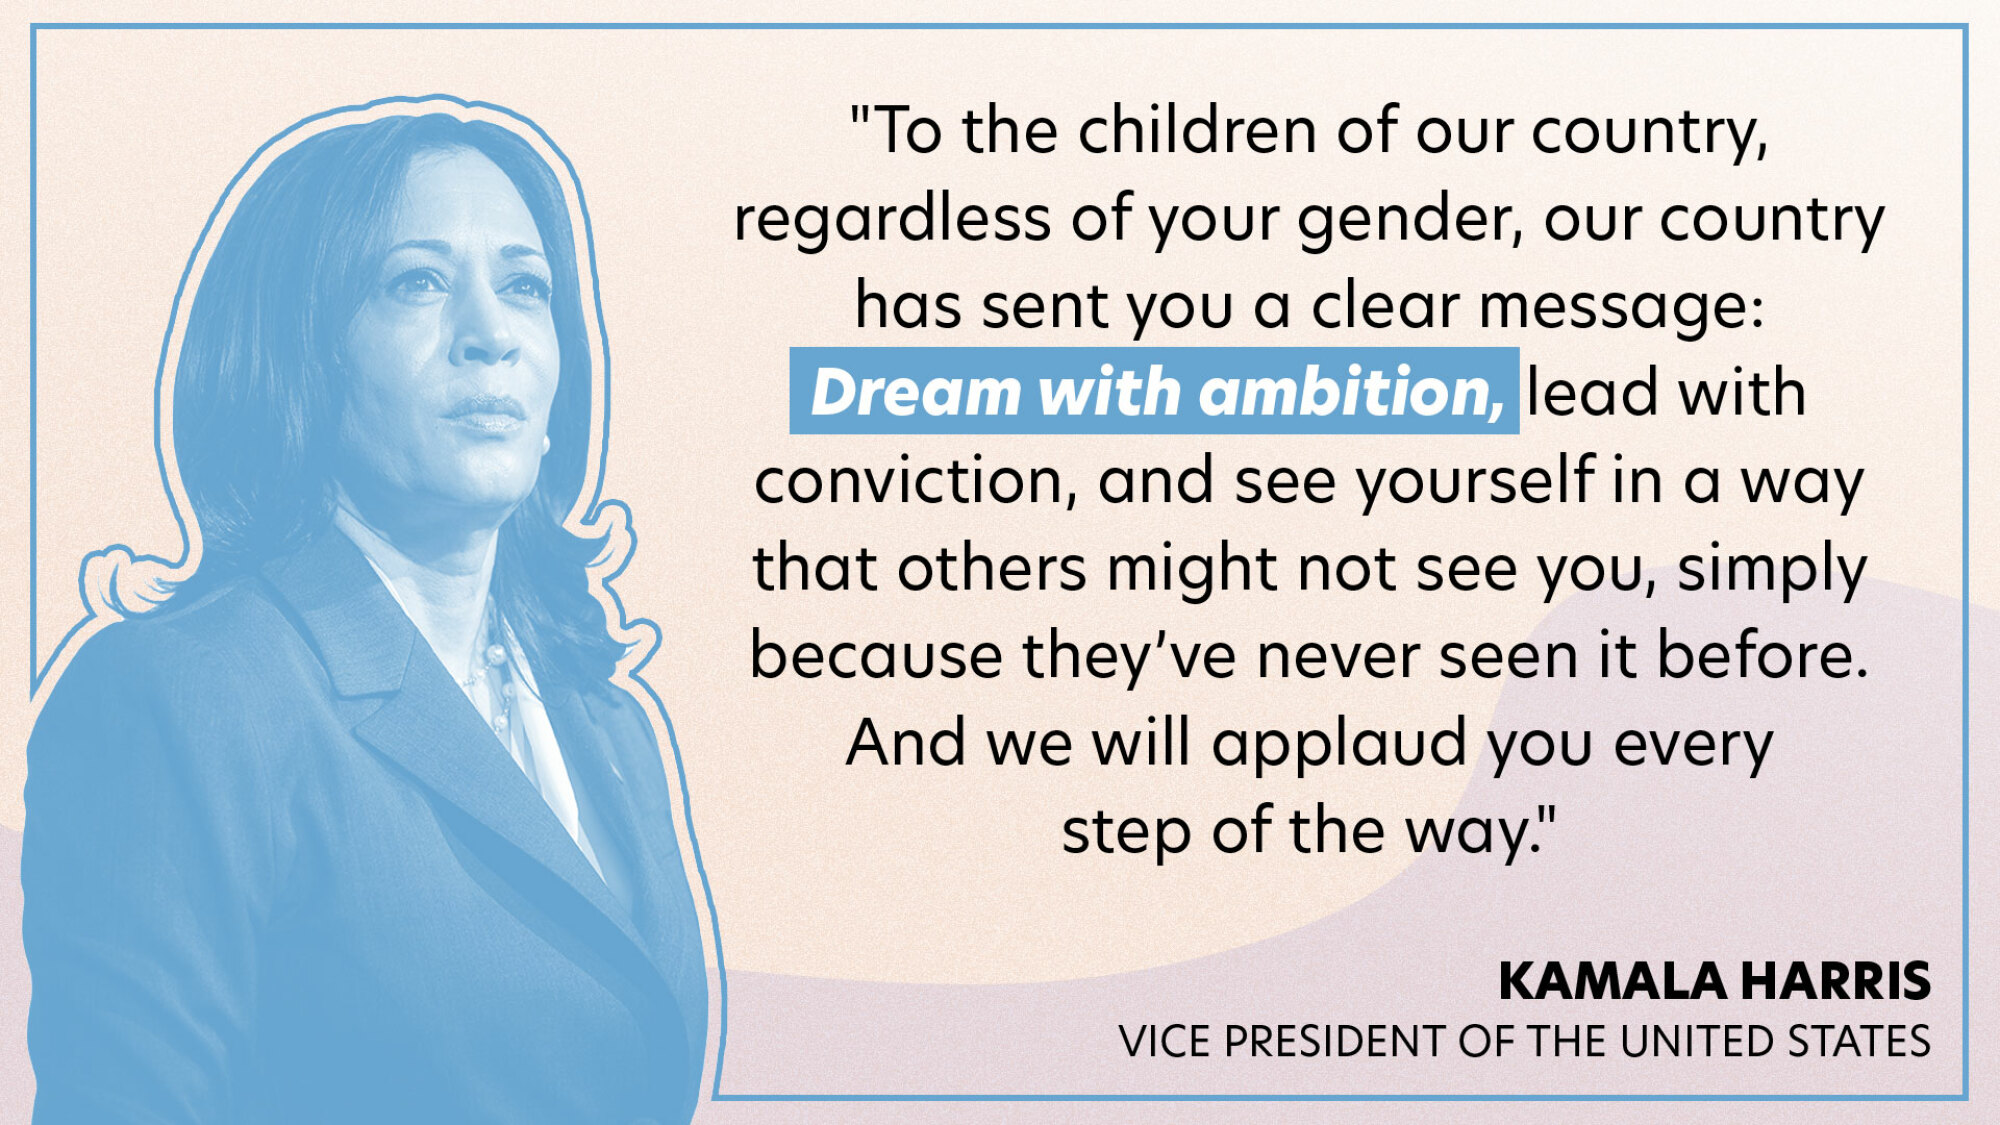 "​​To the children of our country, regardless of your gender, our country has sent you a clear message: Dream with ambition, lead with conviction, and see yourself in a way that others might not see you, simply because they’ve never seen it before. And we will applaud you every step of the way."